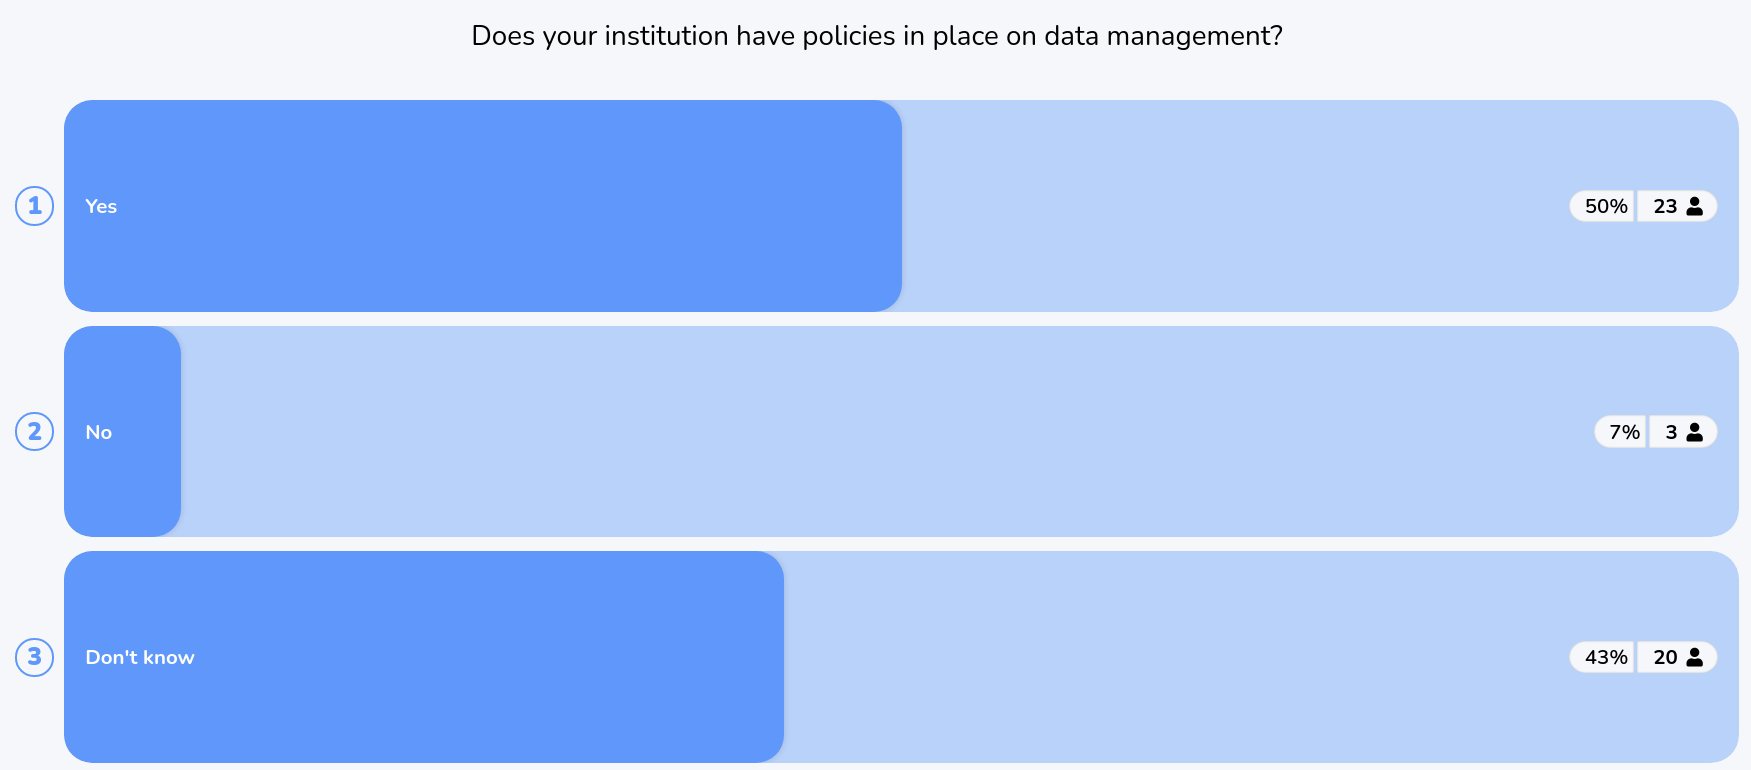 Does your institution have policies in place on data management?